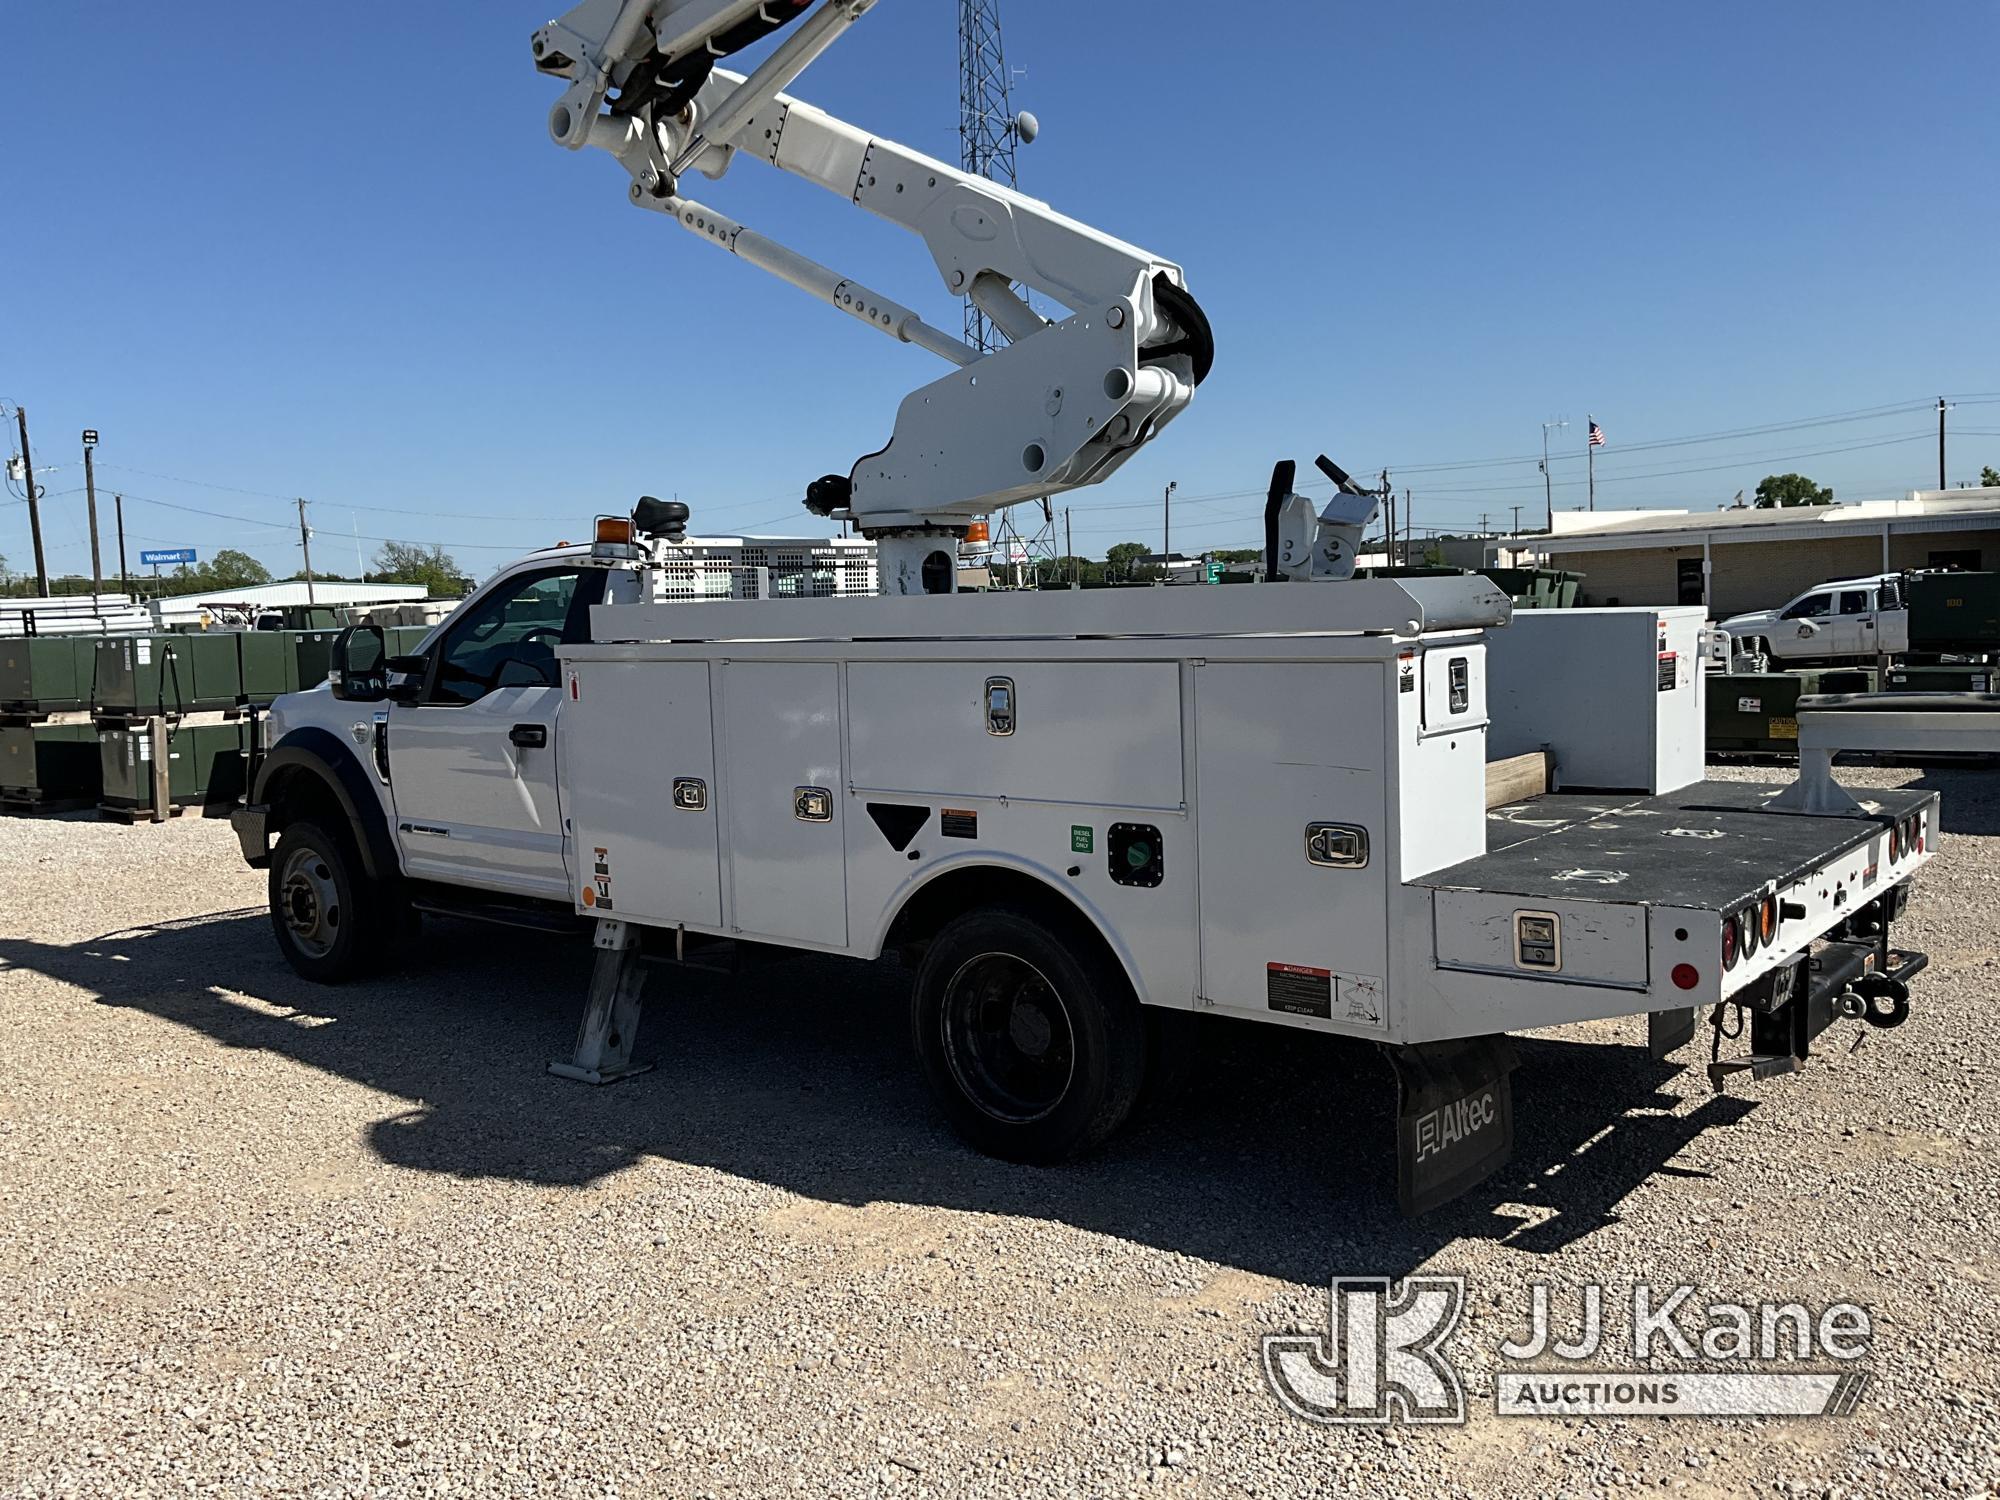 (Azle, TX) Altec AT41M, Articulating & Telescopic Material Handling Bucket Truck mounted behind cab